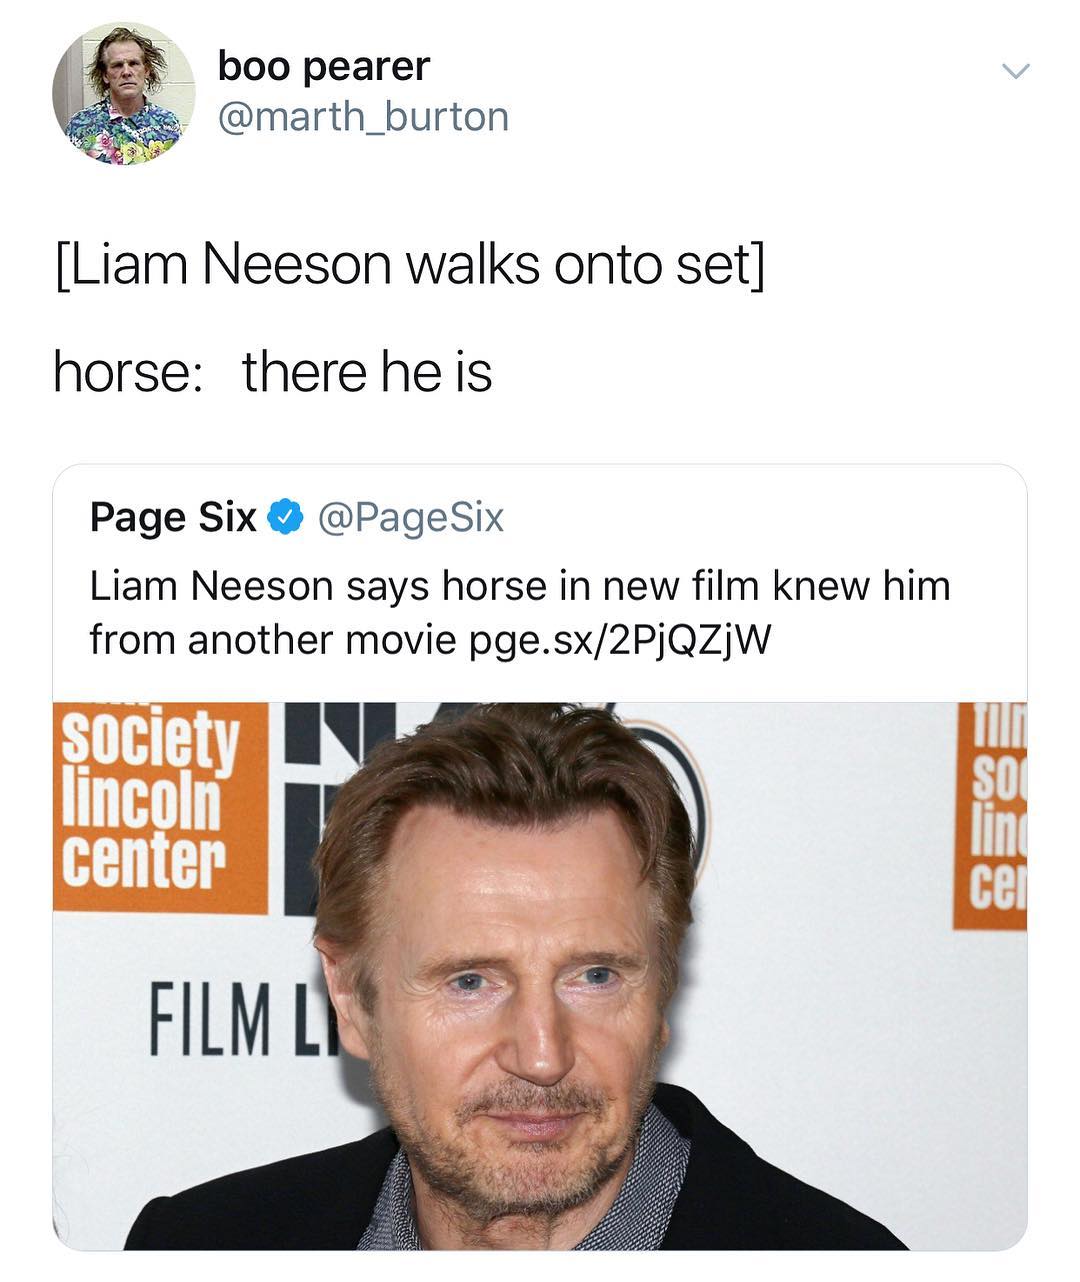 liam neeson horse - boo boo pearer Liam Neeson walks onto set horse there he is Page Six Six Liam Neeson says horse in new film knew him from another movie pge.sx2PjQZjW Society Iv lincoln center Sese Film L